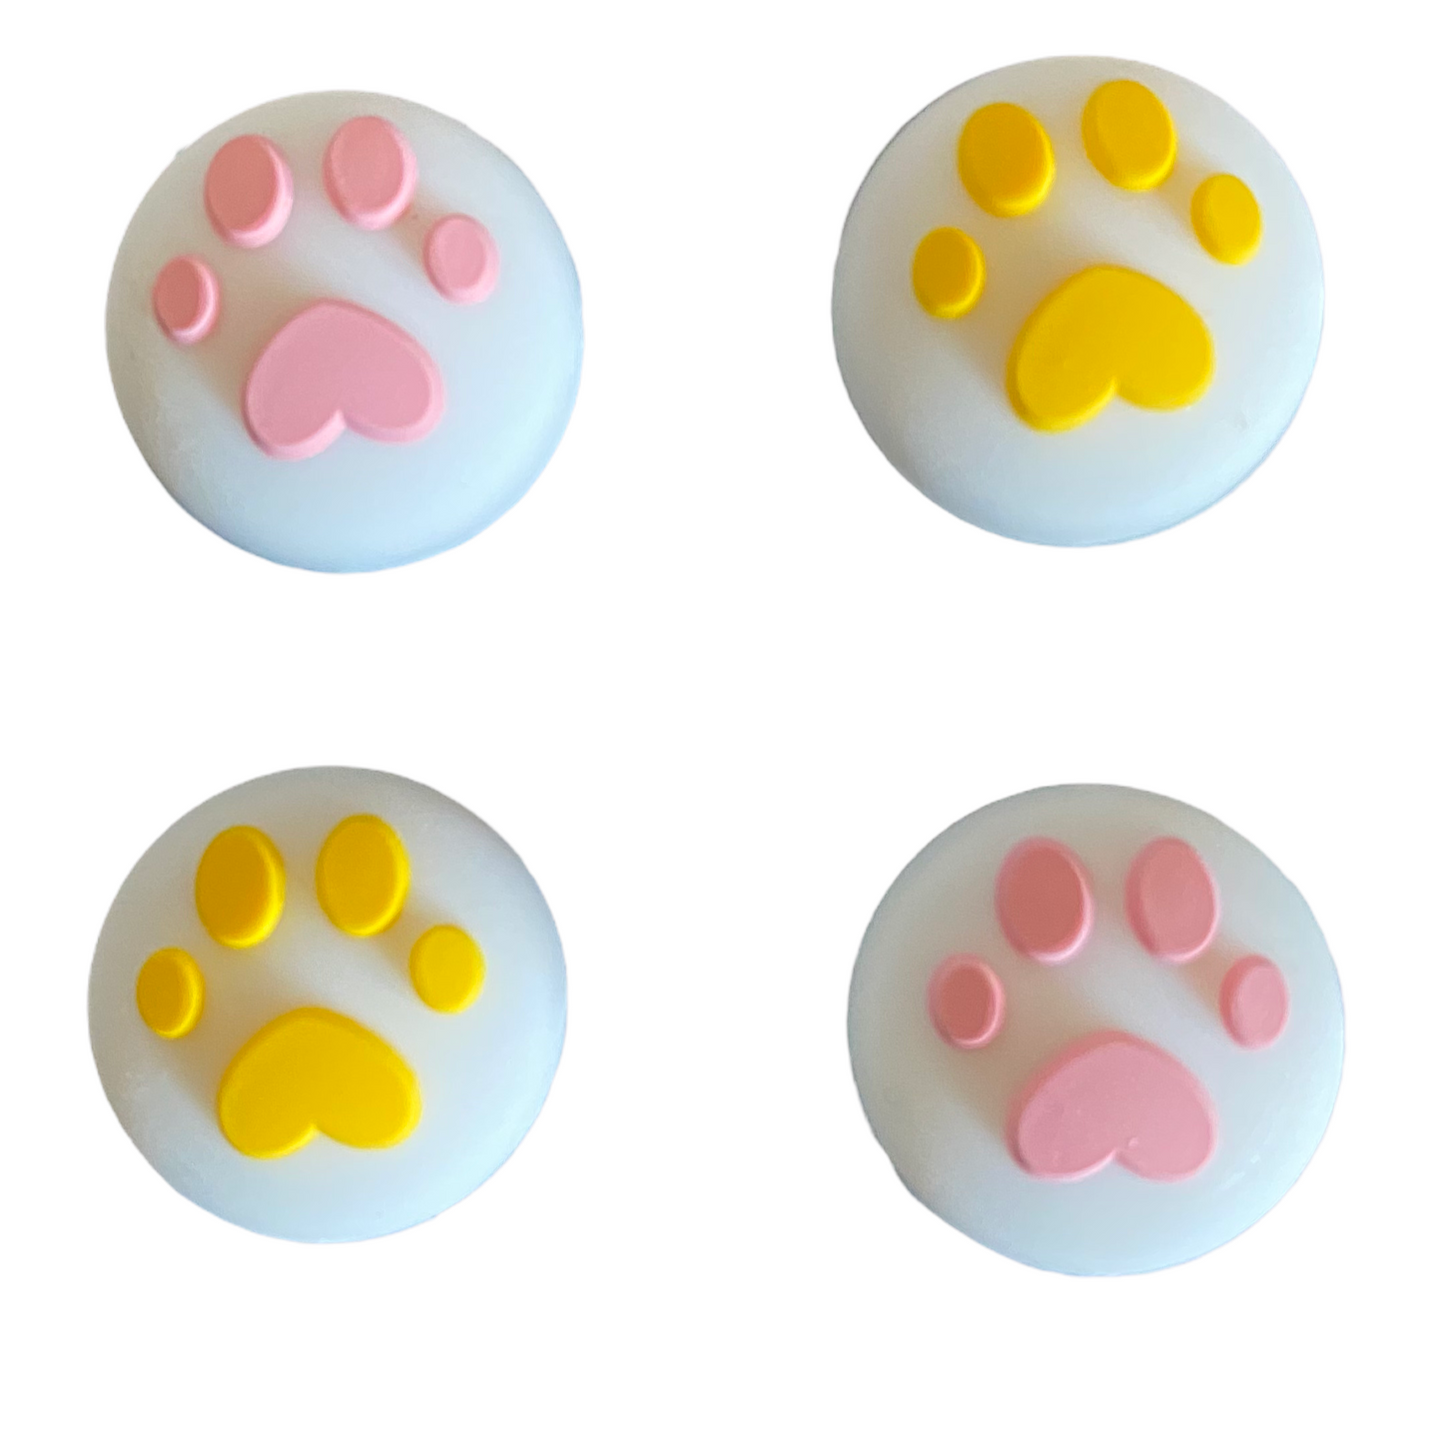 JenDore Pink Yellow Paw 4Pcs Silicone Thumb Grip Caps for Nintendo Switch